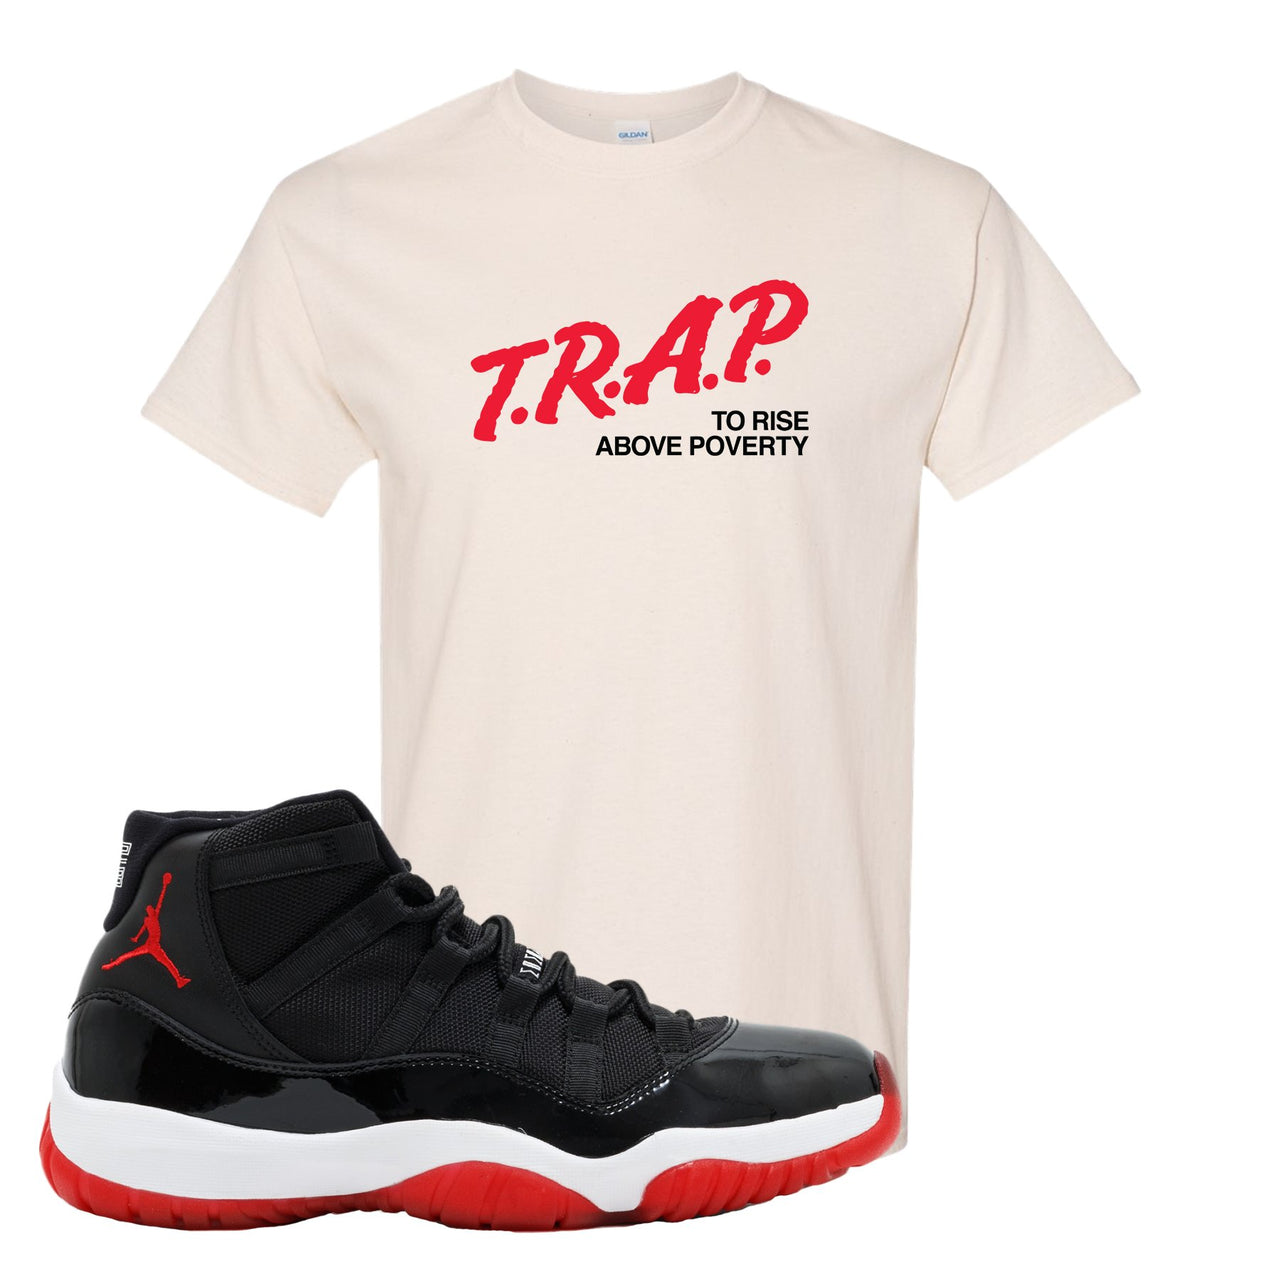 Jordan 11 Bred Trap To Rise Above Poverty White Sneaker Hook Up T-Shirt